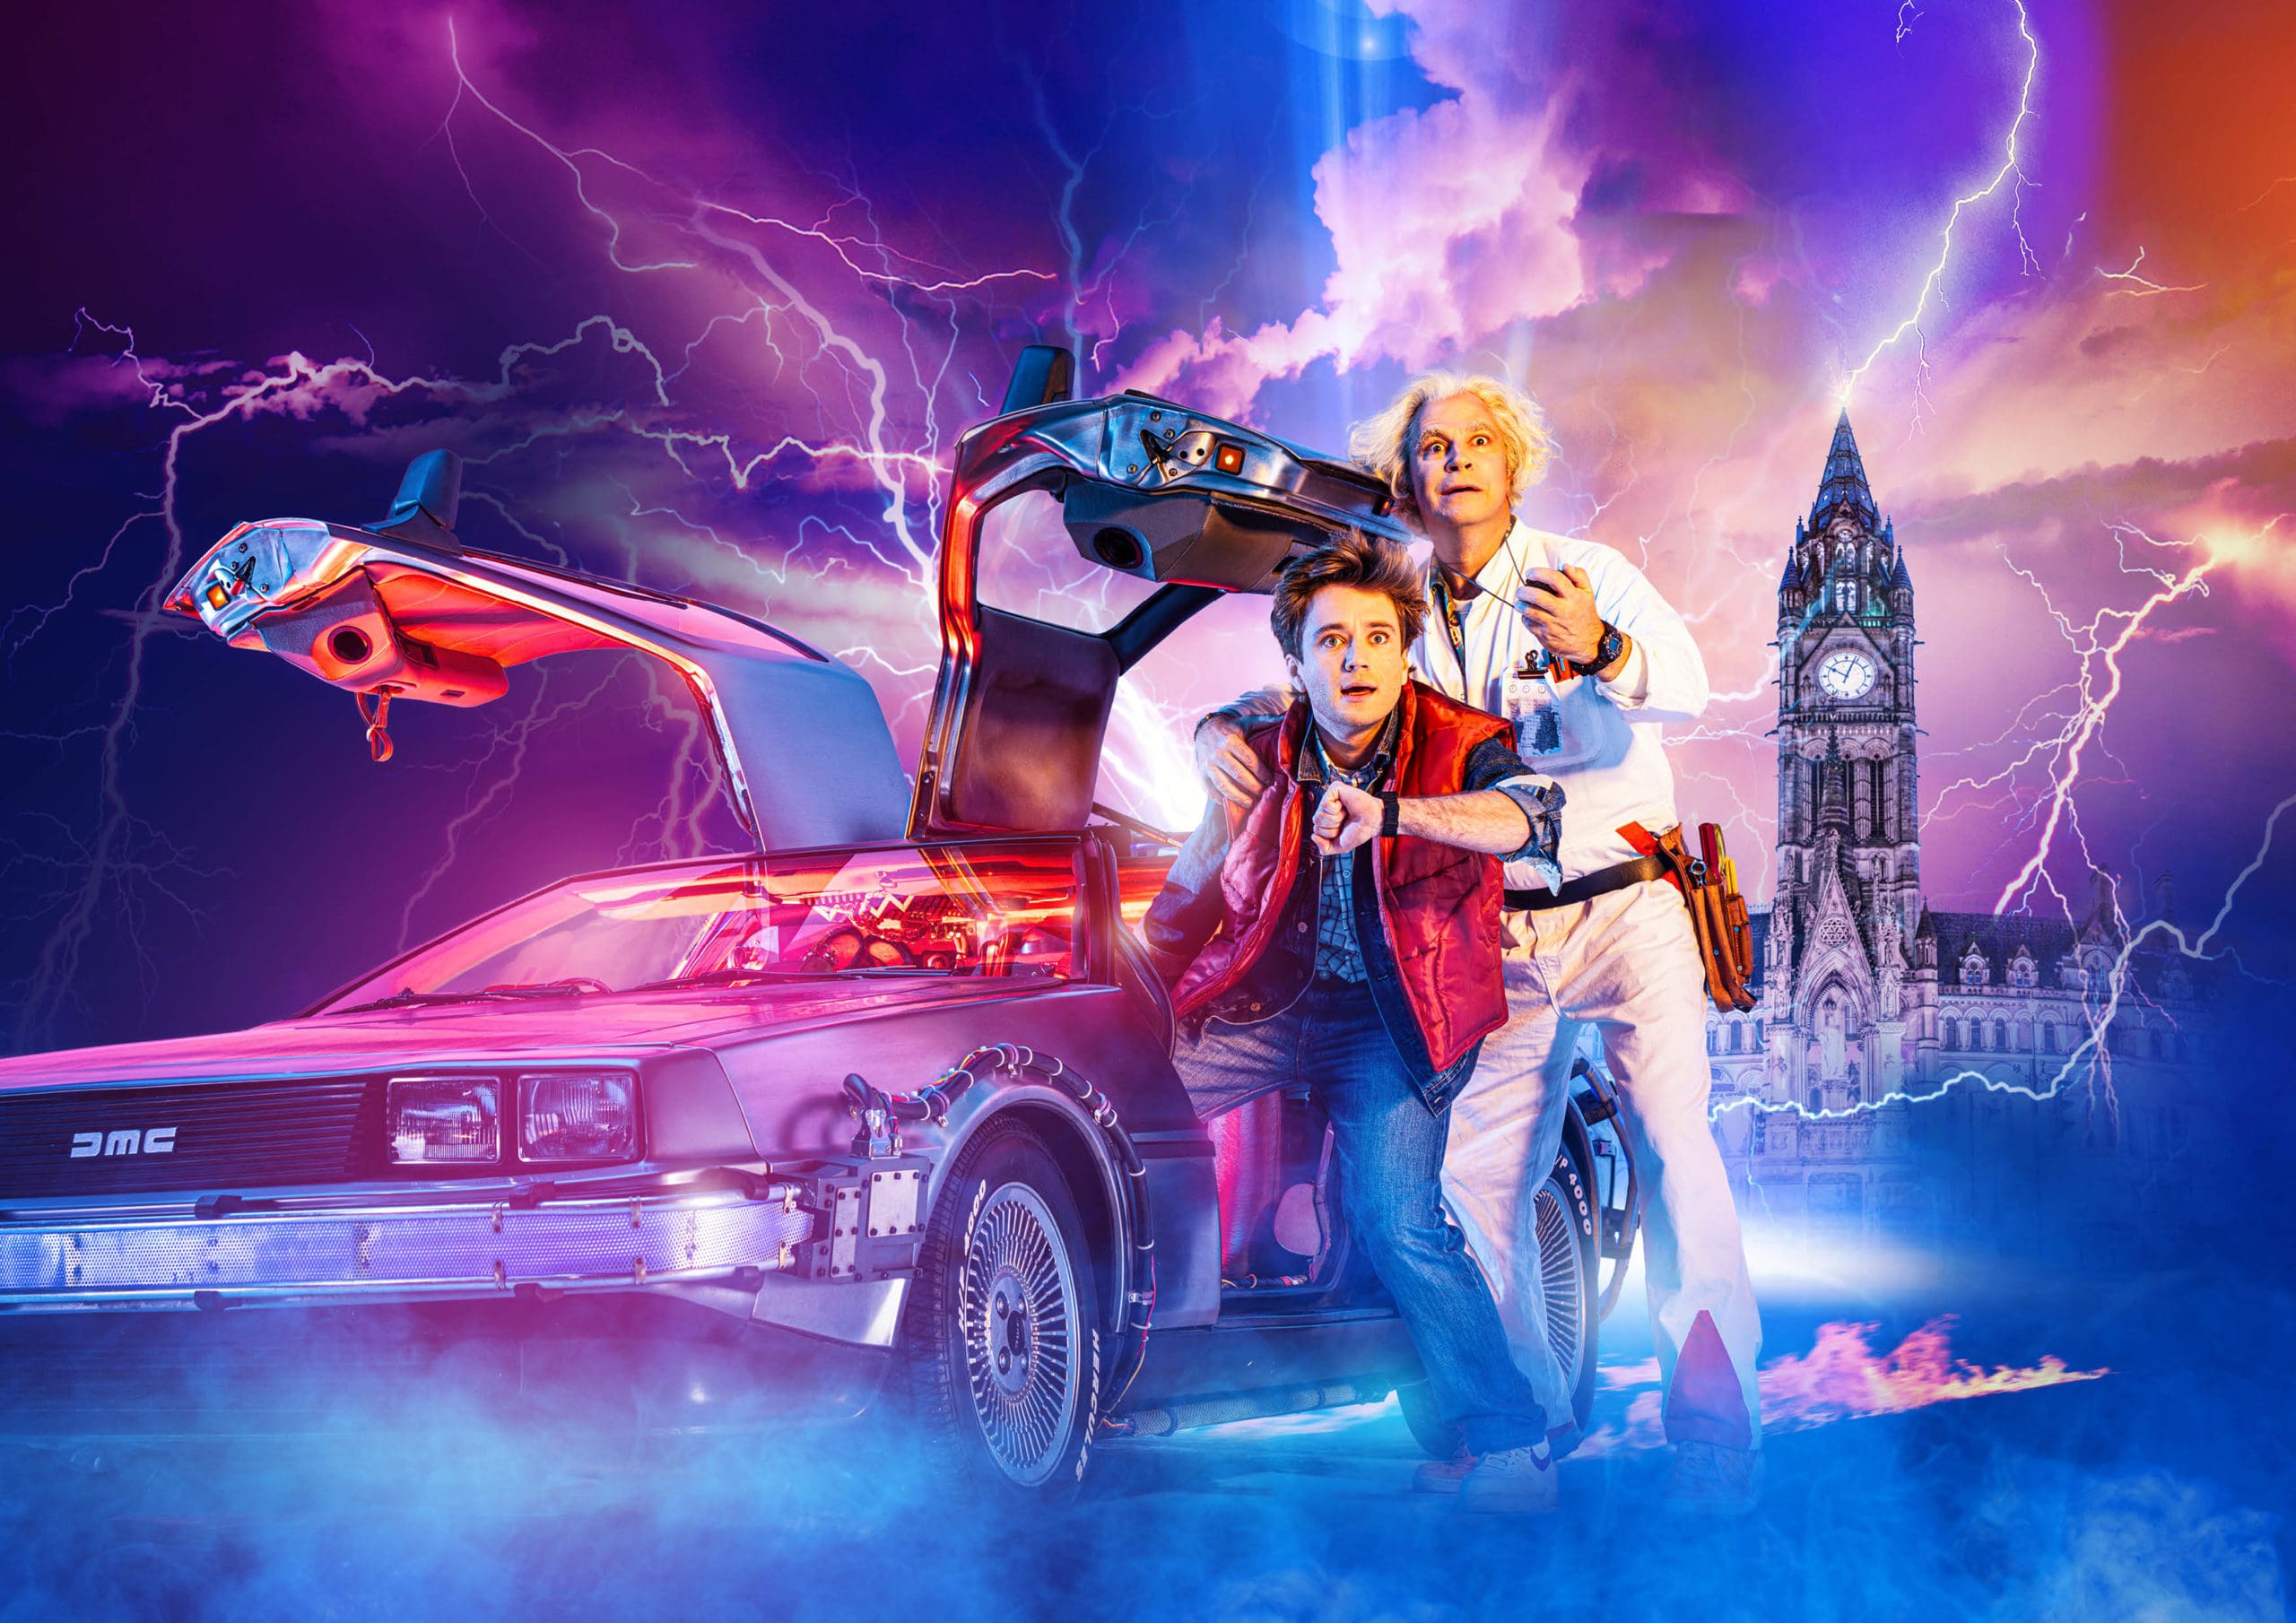 NEWS: Back To The Future – The Musical to release original cast recording